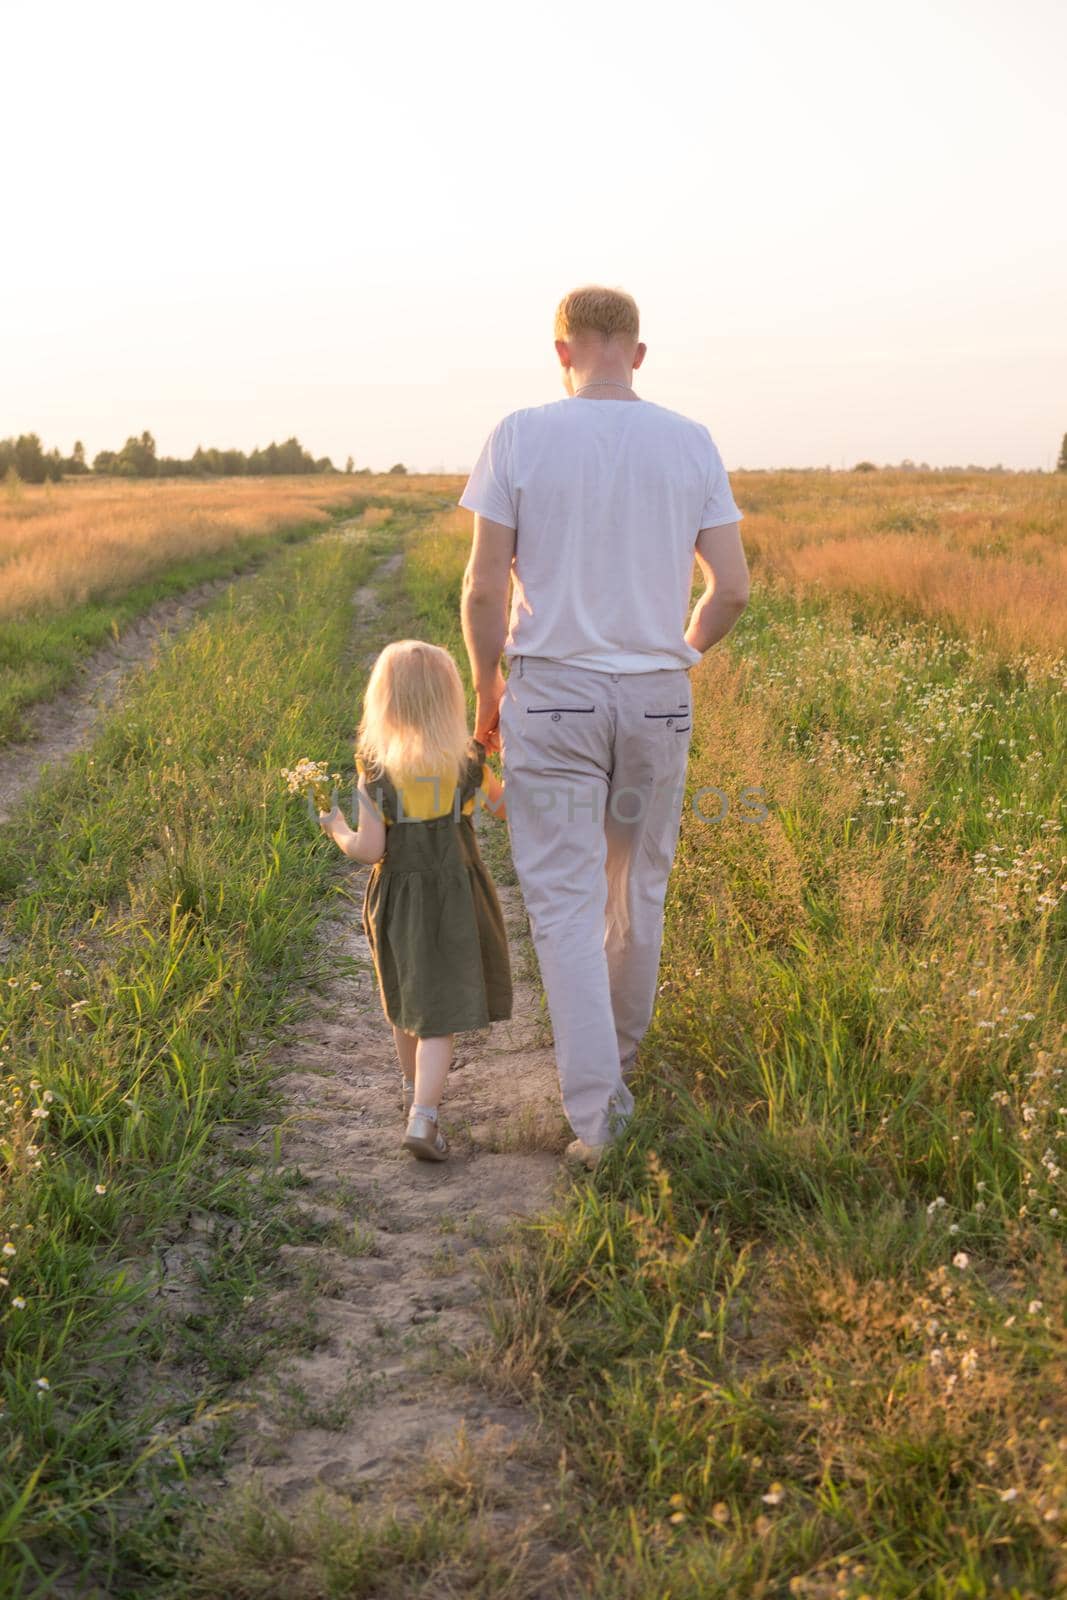 Dad and his blonde daughter are walking and having fun in a chamomile field. by Annu1tochka